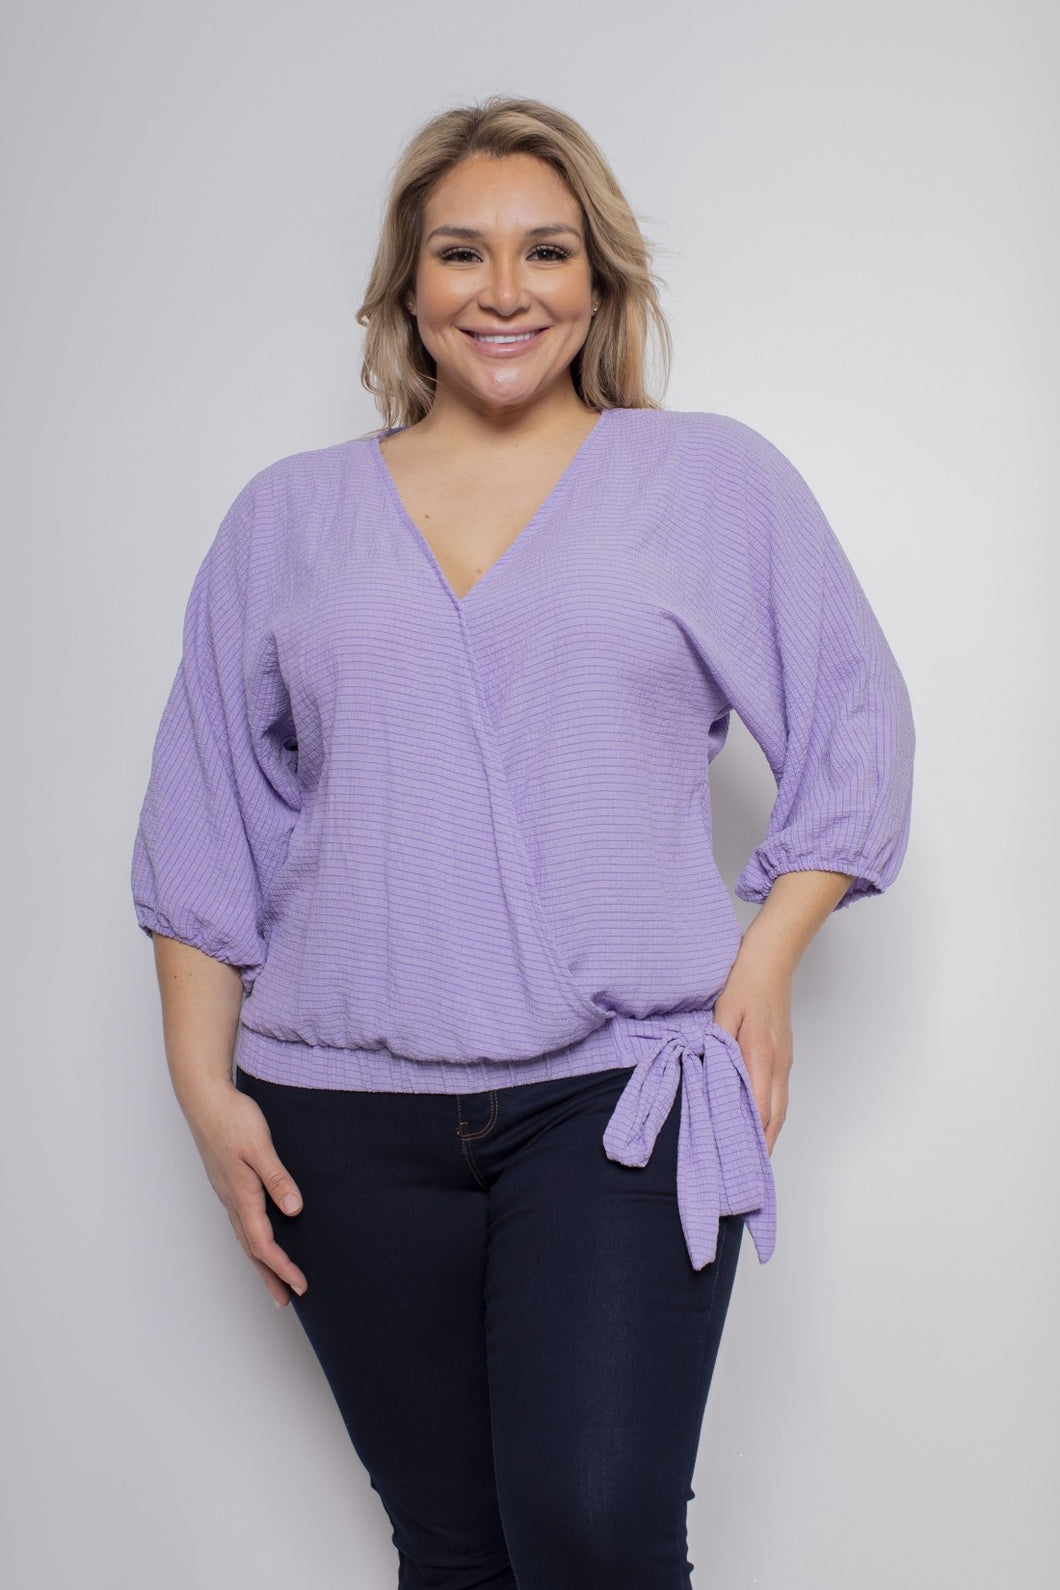 A lovely lavender color top, our Leeann faux wrap side tie blouse is a perfect top for every season.  With the lightweight linen feel, you will be sure to remain cool and comfortable during those hot, humid days while looking stylish.  The details are in the design and this top does not disappoint with its faux wrap front and side tie, stretch banded bottom and 3/4 sleeves.  A keyhole button closure is found in the back at the neckline.  Color- Lavender. 3/4 sleeves.